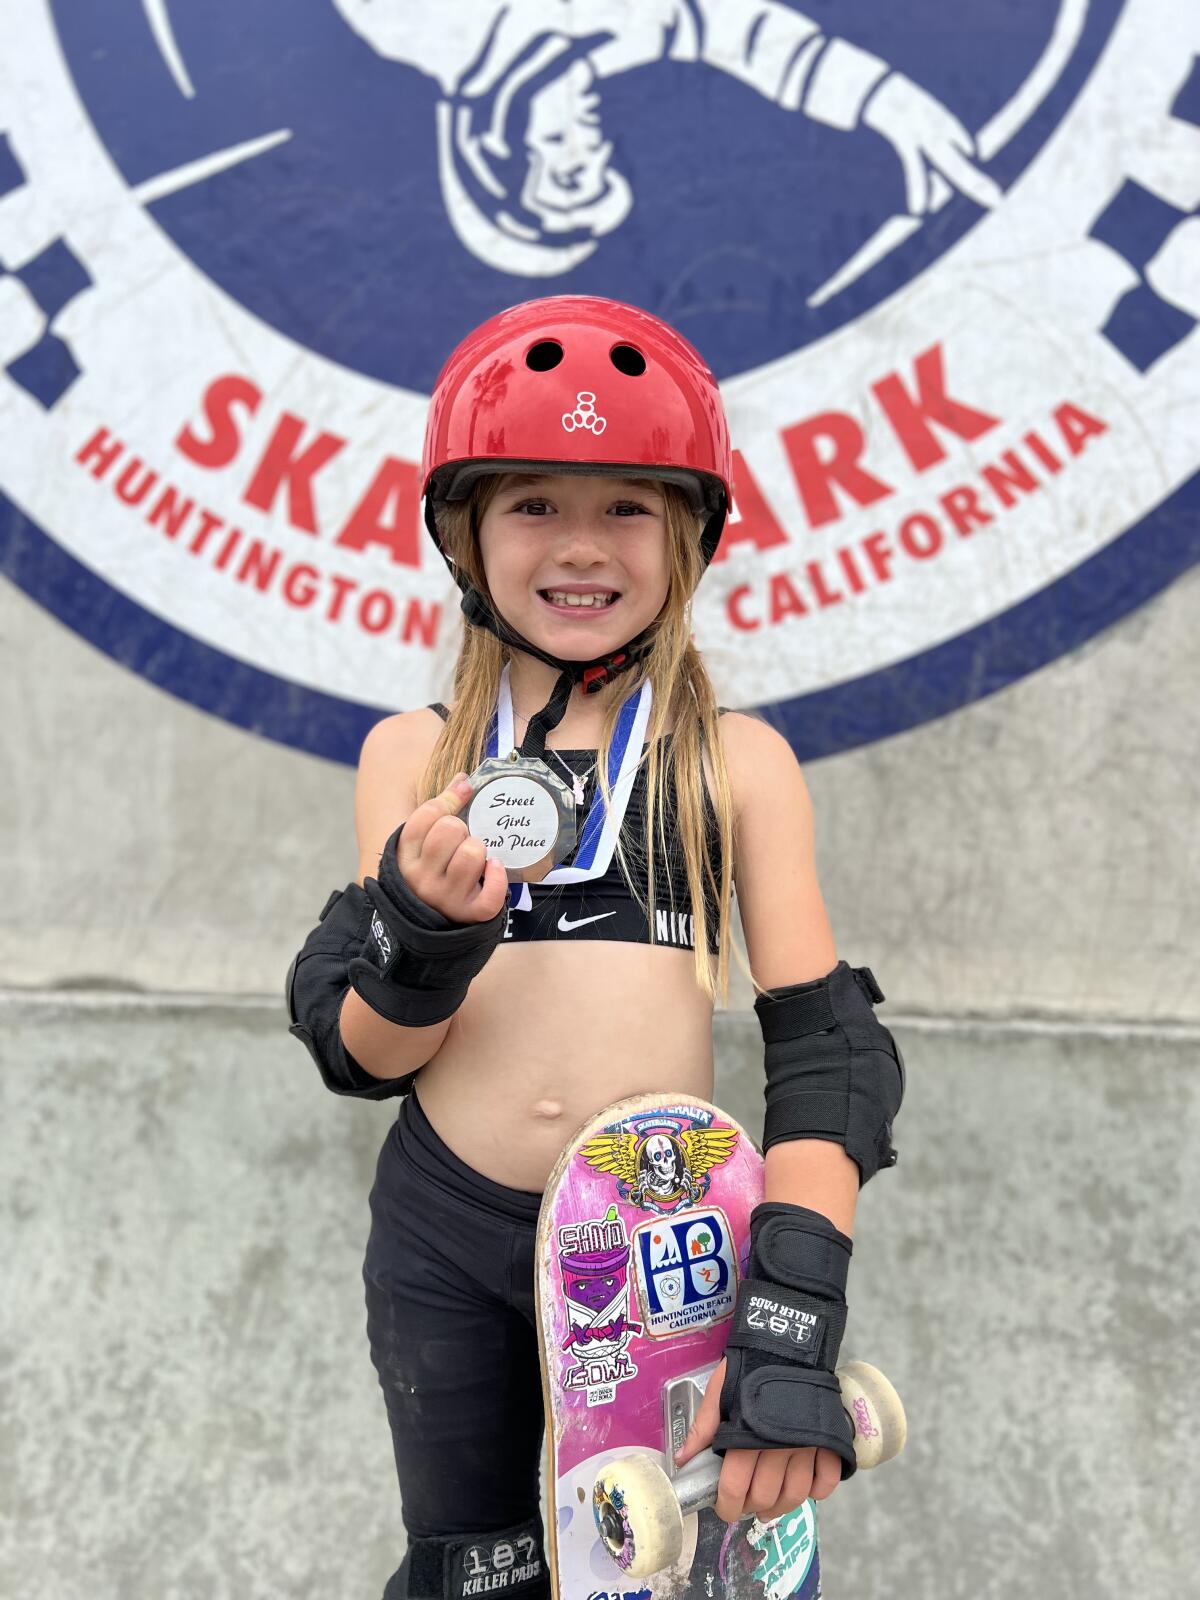 Huntington Beach's Brooke Benton took second place in girls' street skateboarding at a local event over the weekend.